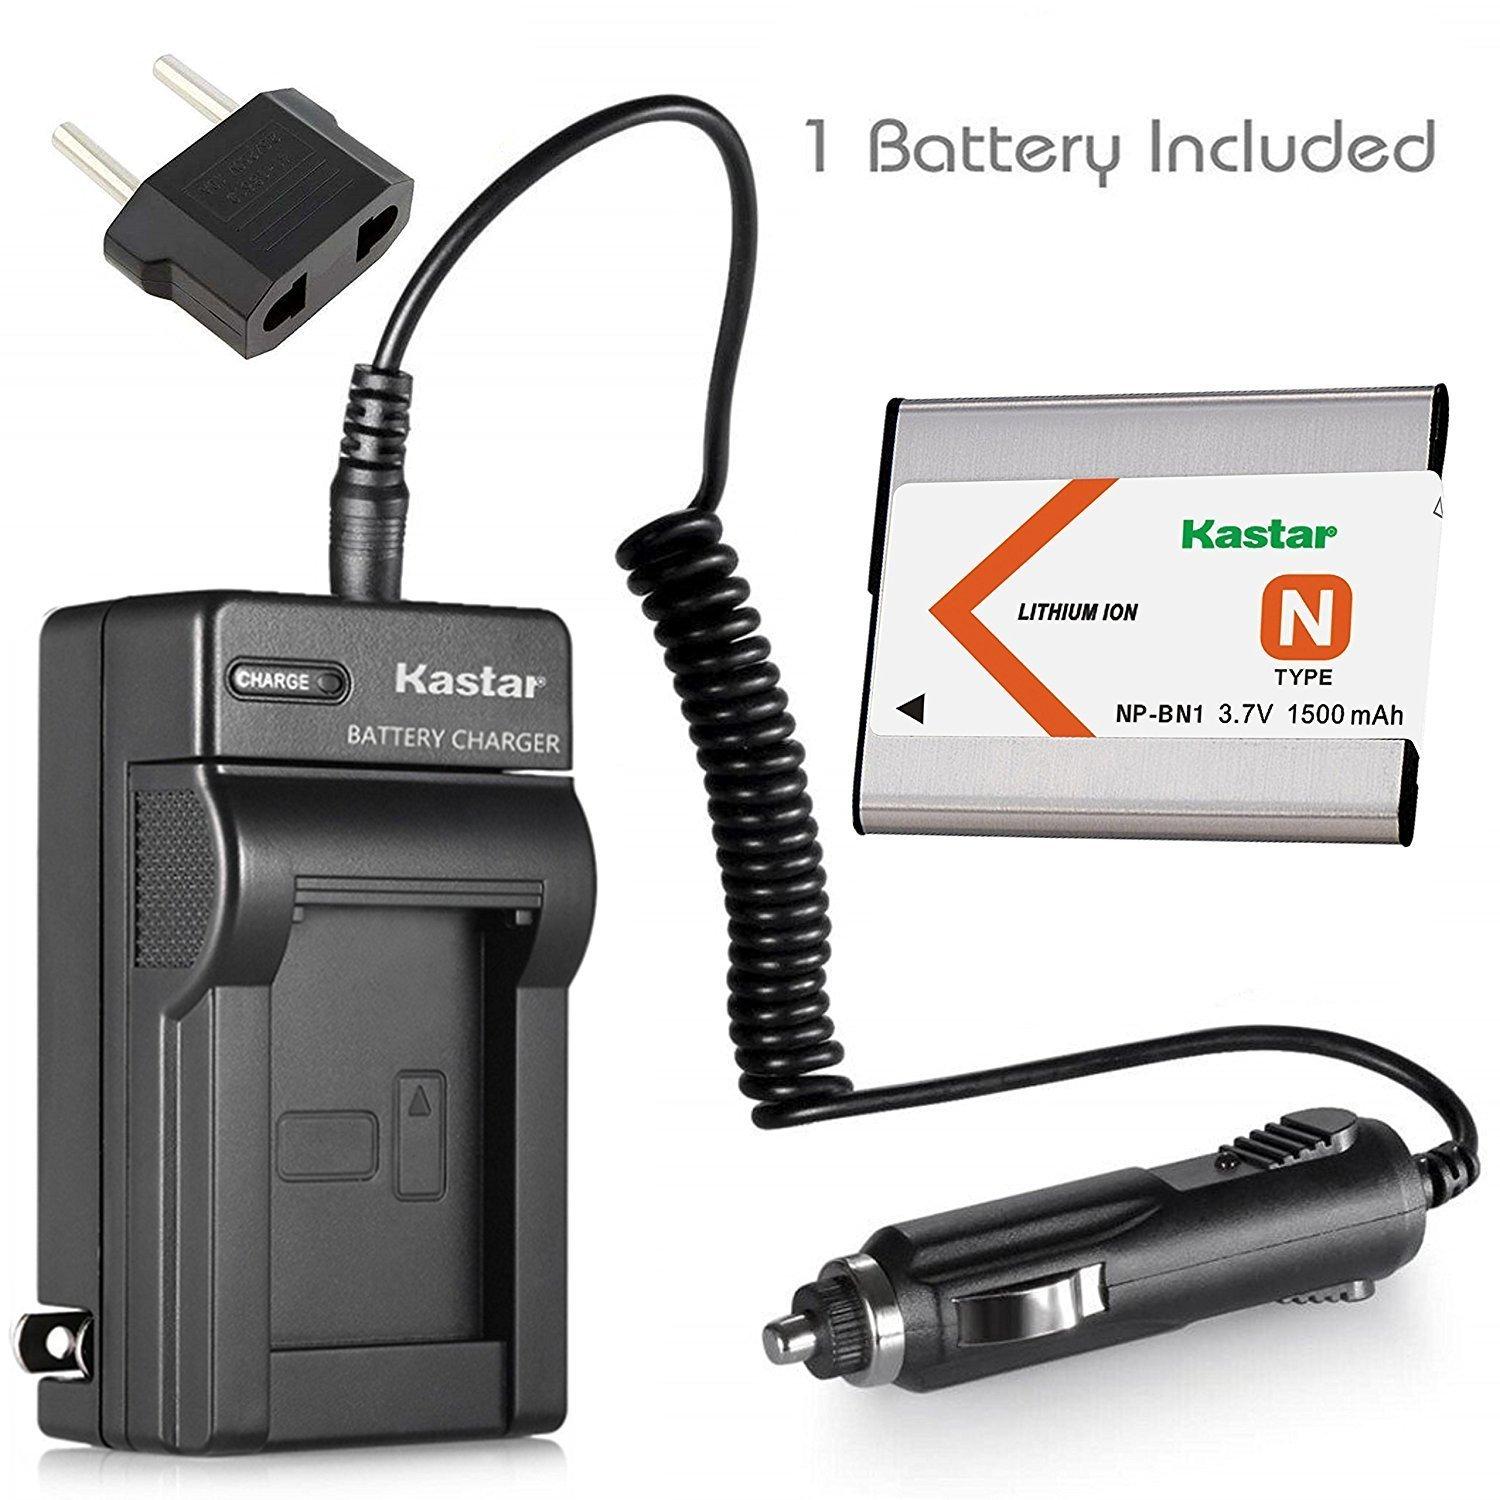 Kastar Battery and Charger for Sony NP-BN1 BC-CSN Cyber-shot DSC-TX5 DSC-TX7  DSC-TX9 DSC-W310 DSC-W320 DSC-W330 DSC-W350 DSC-W360 DSC-W380 DSC-W390 DSC-W510  DSC-W530 DSC-W560 DSC-W570 DSC-WX5 DSC-WX9 | Lazada PH